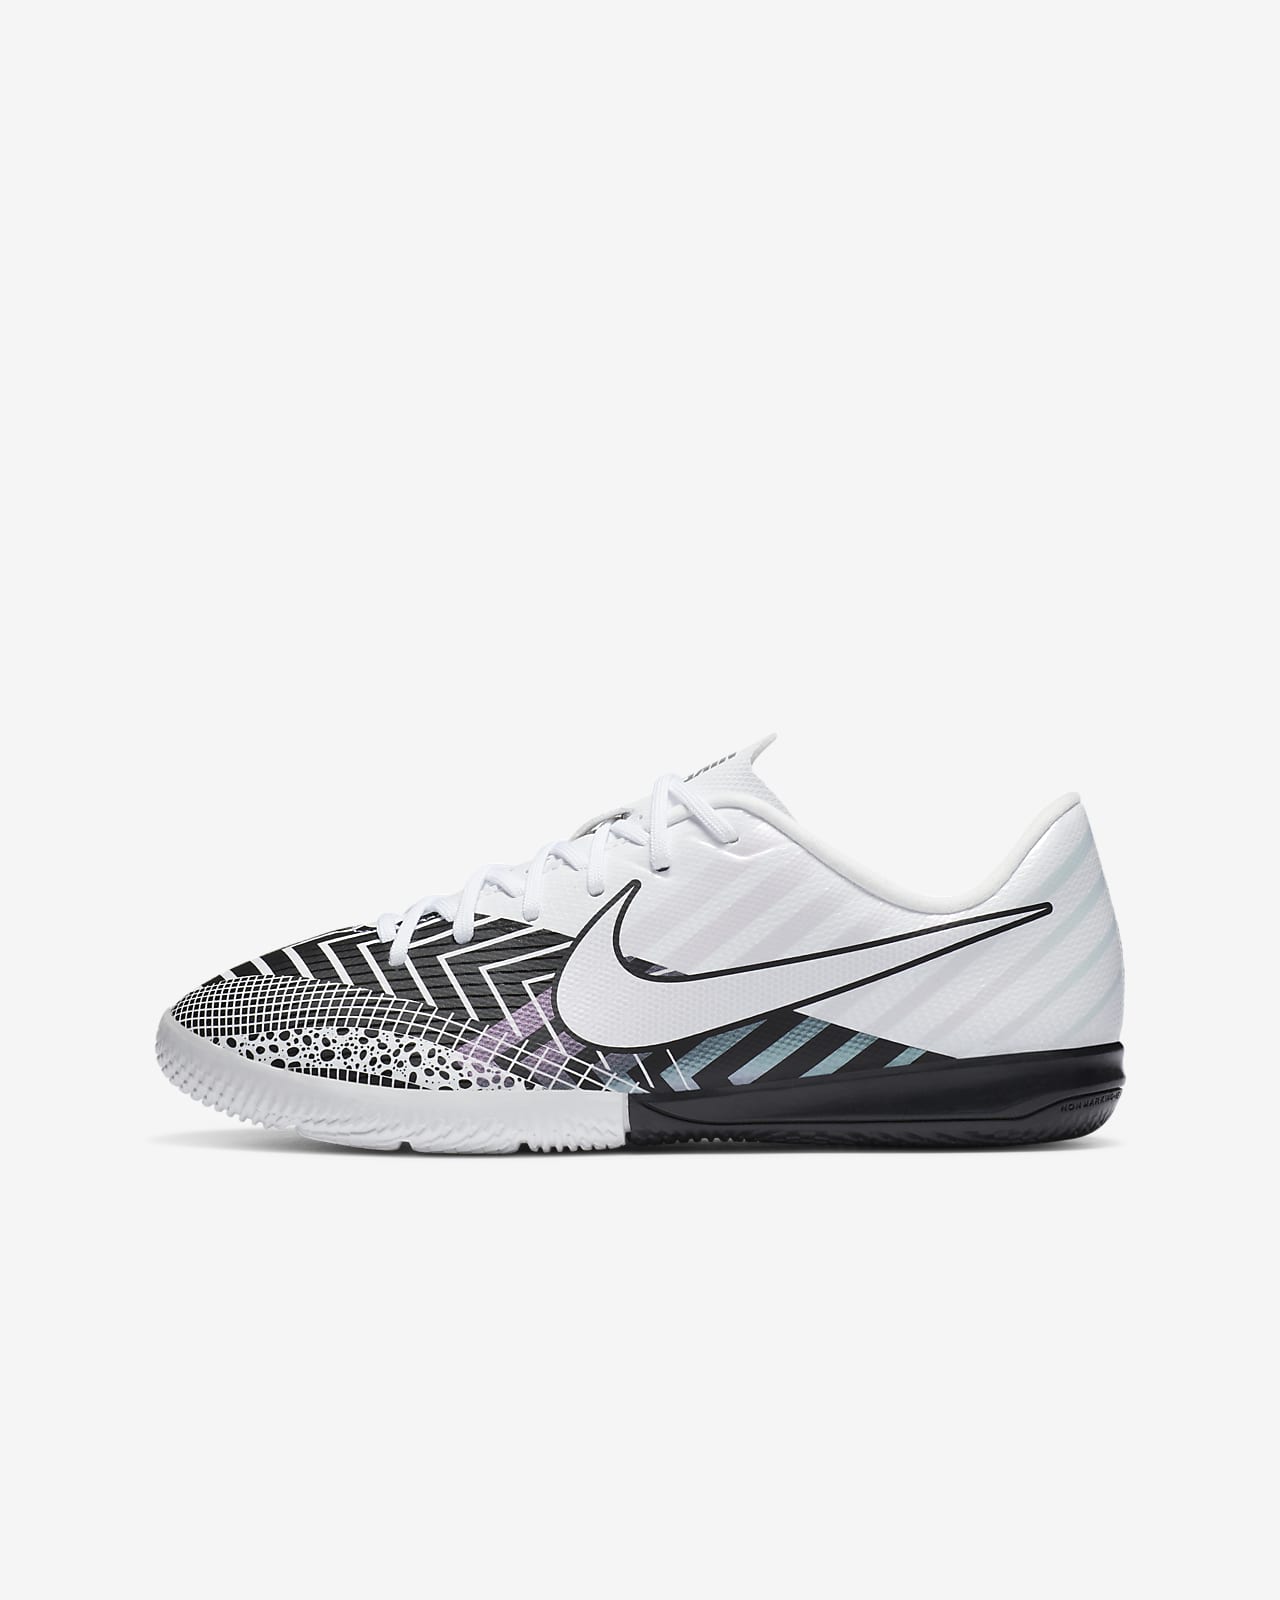 white mercurial indoor soccer shoes